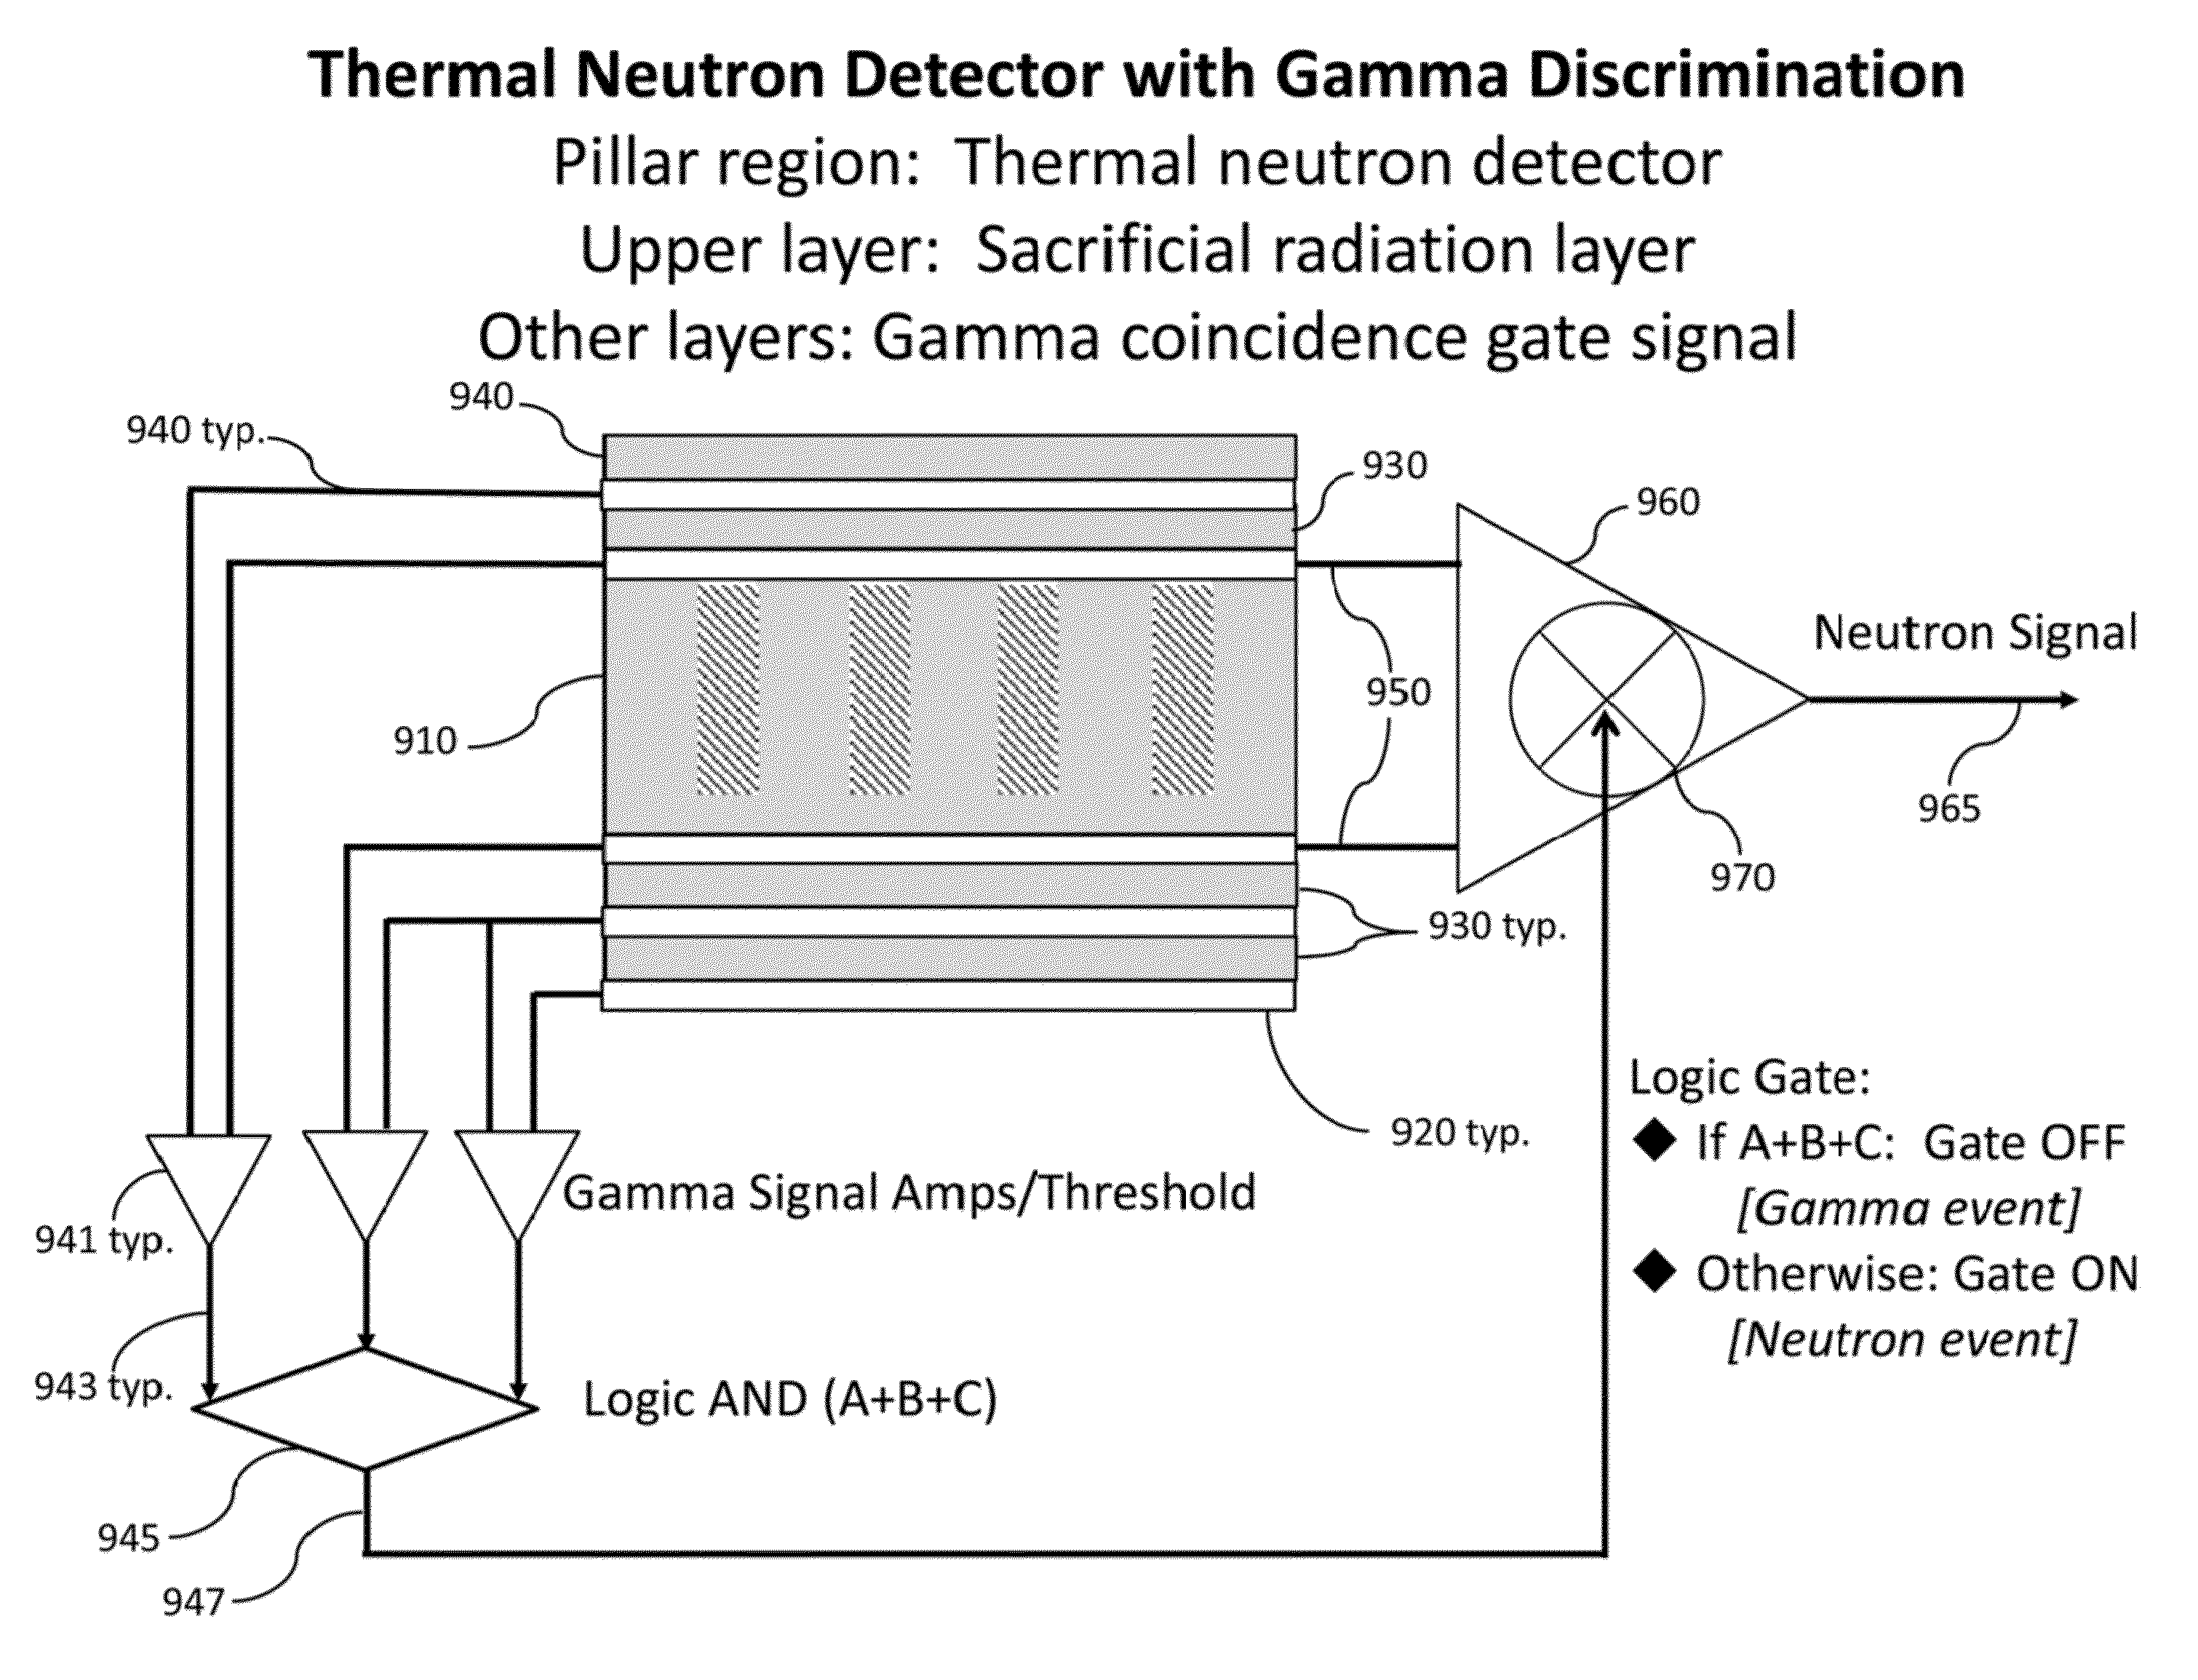 Method for manufacturing solid-state thermal neutron detectors with simultaneous high thermal neutron detection efficiency (&gt;50%) and neutron to gamma discrimination (&gt;1.0E4)